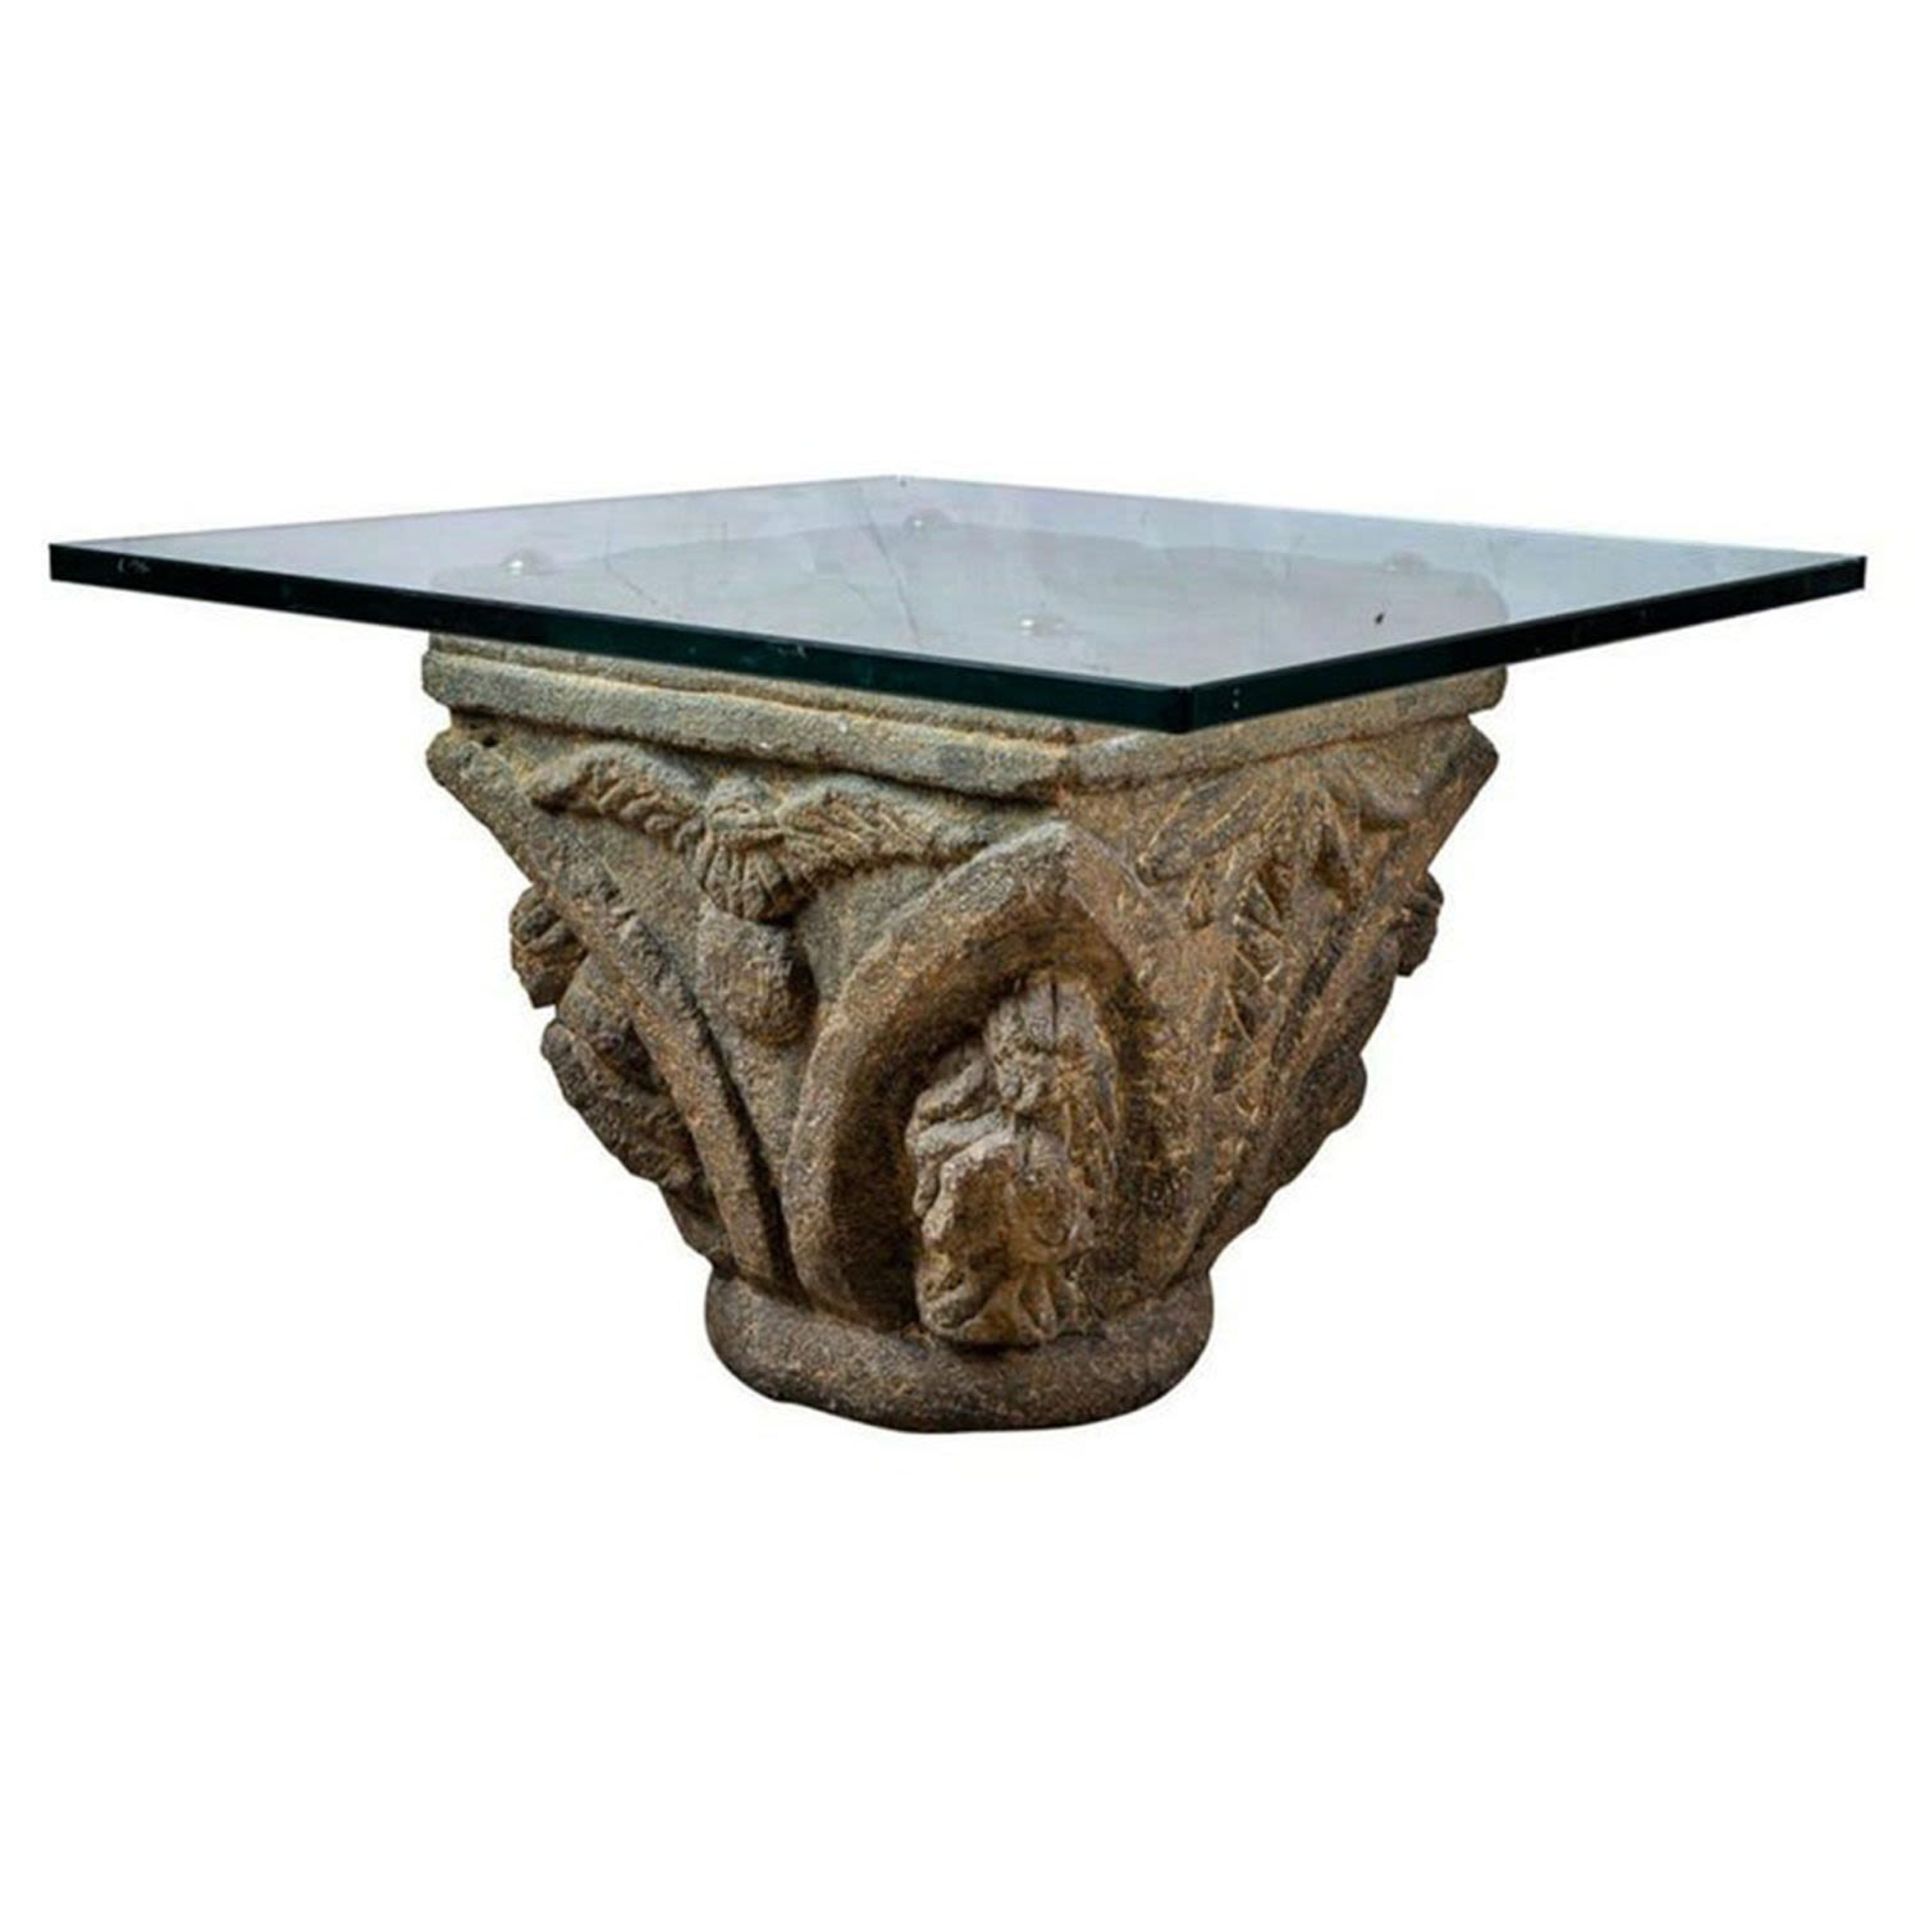 Italian capitello from the 17th century adapted to a table, in carved stone - Image 2 of 5